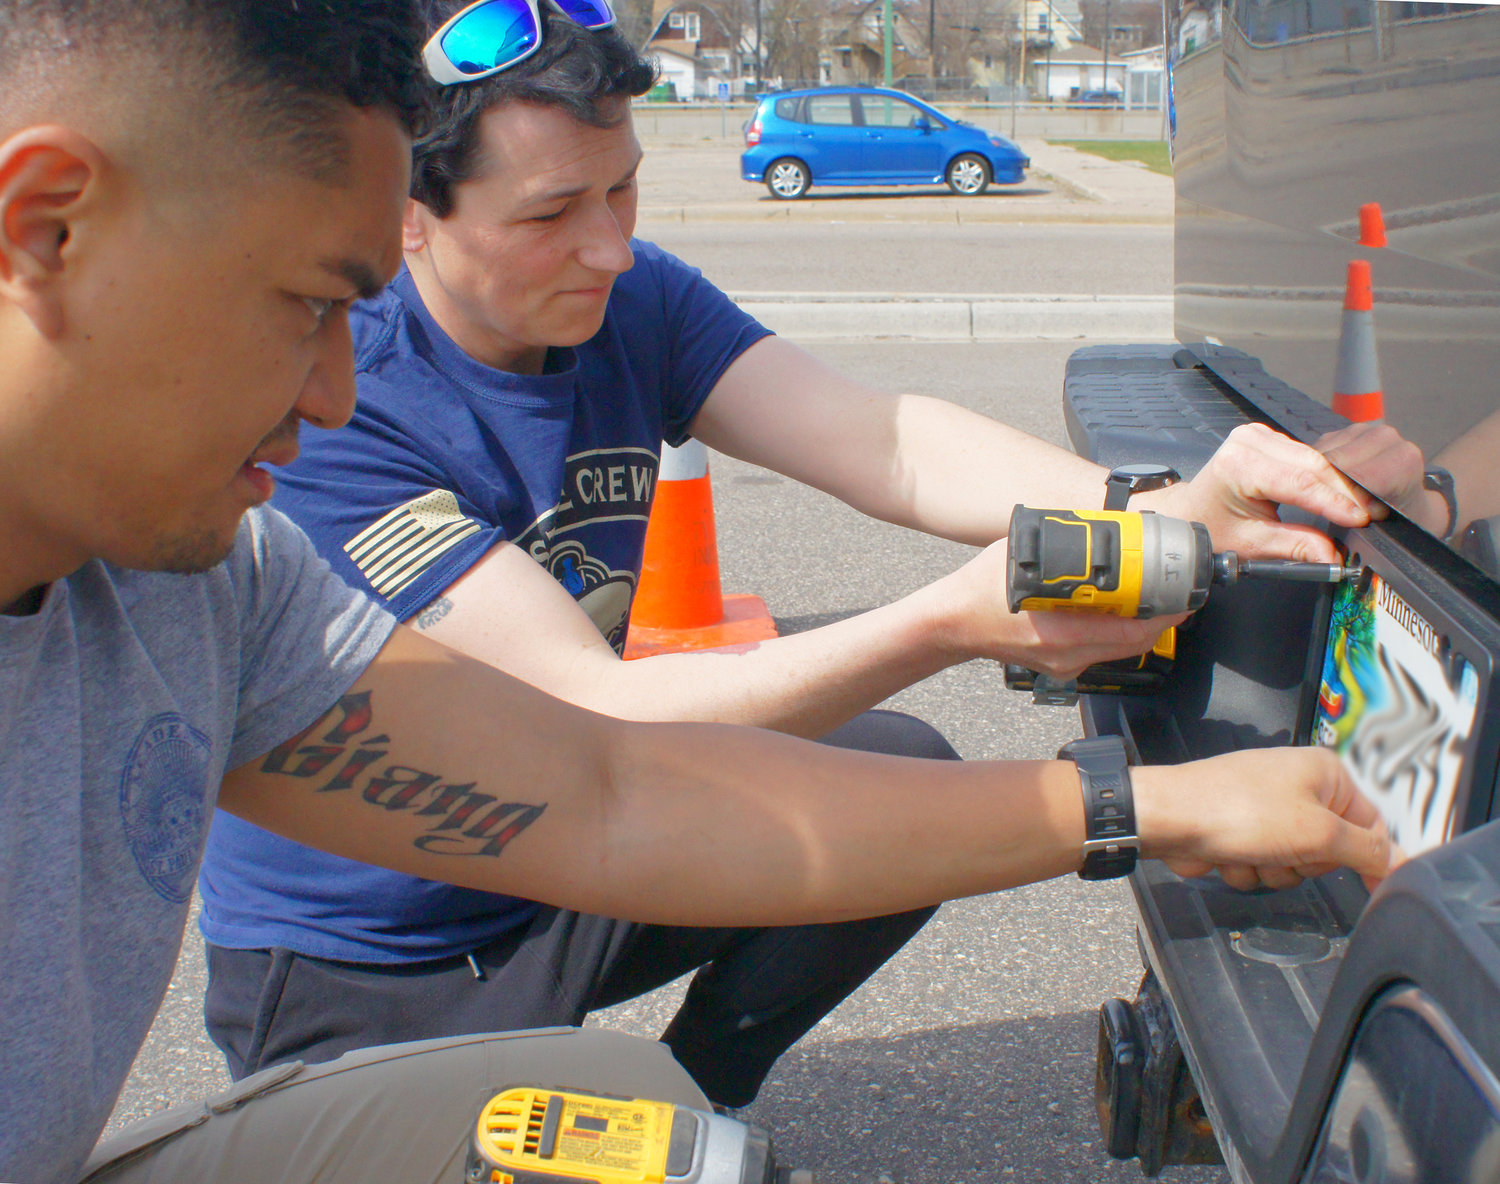 Bryan Giang (left) and Melissa Joly replace conventional license plate fasteners with anti-theft screws. For information on future SPPD converter painting events and how to register, check SPPD’s Facebook page: https://bit.ly/3wd7yEE